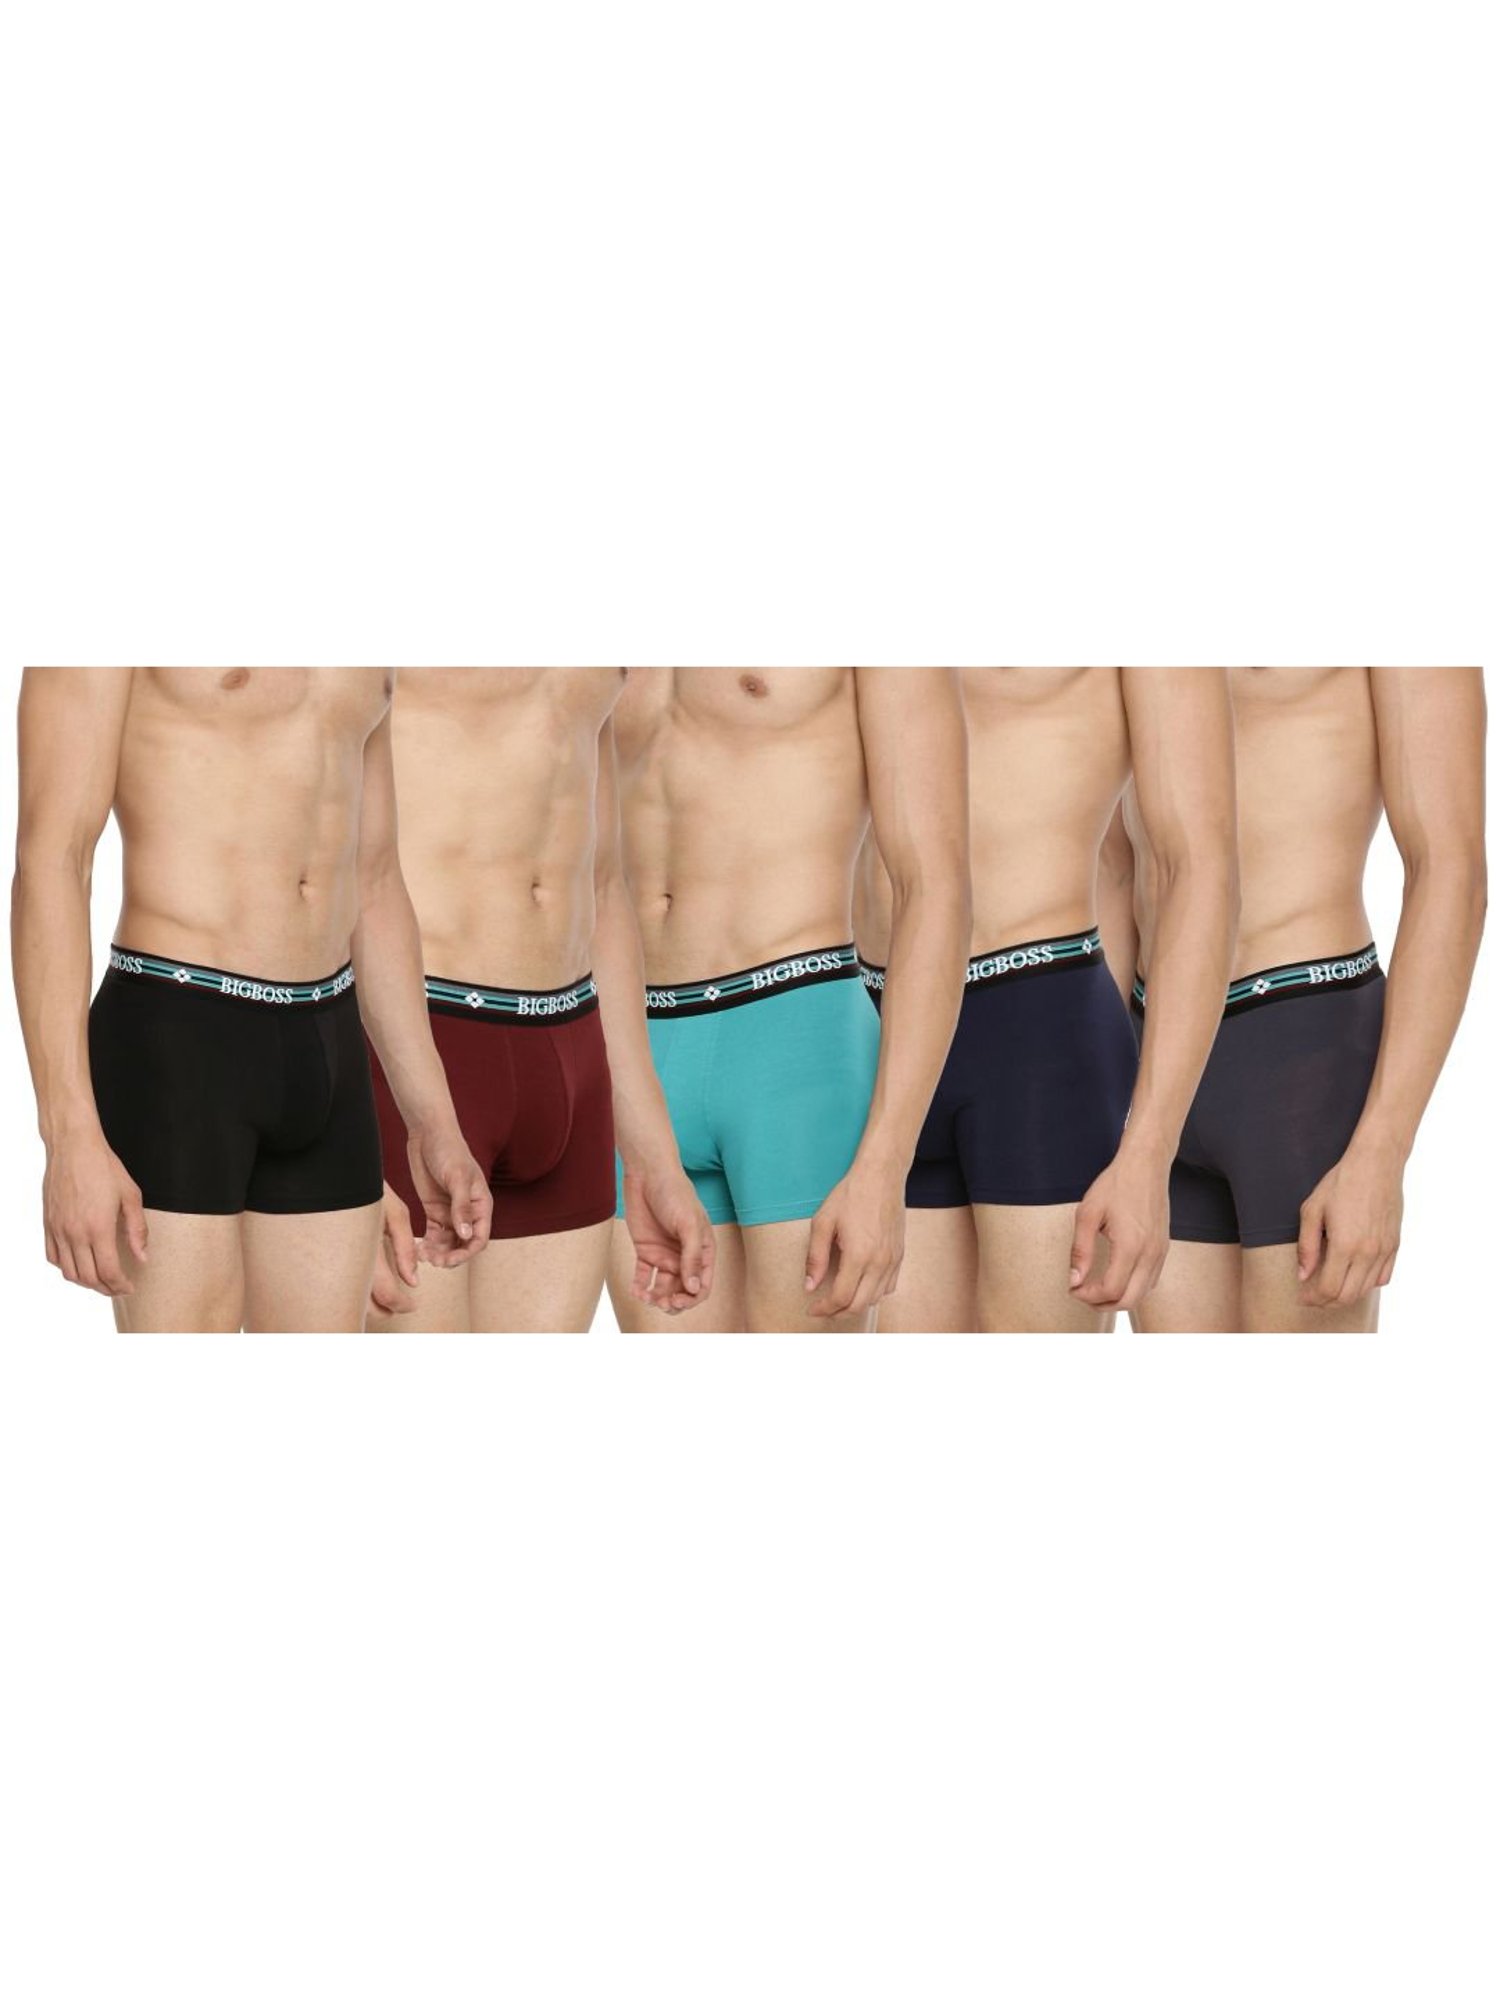 Dollar Bigboss Men's Pack of 4 Soft Combed Cotton Printed Trunk